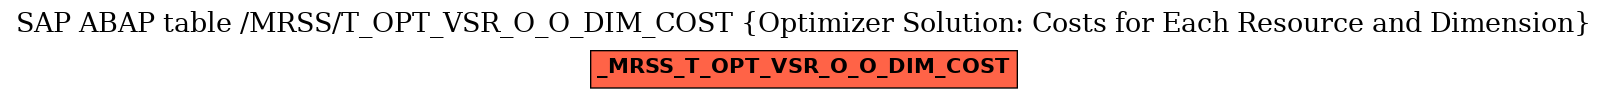 E-R Diagram for table /MRSS/T_OPT_VSR_O_O_DIM_COST (Optimizer Solution: Costs for Each Resource and Dimension)